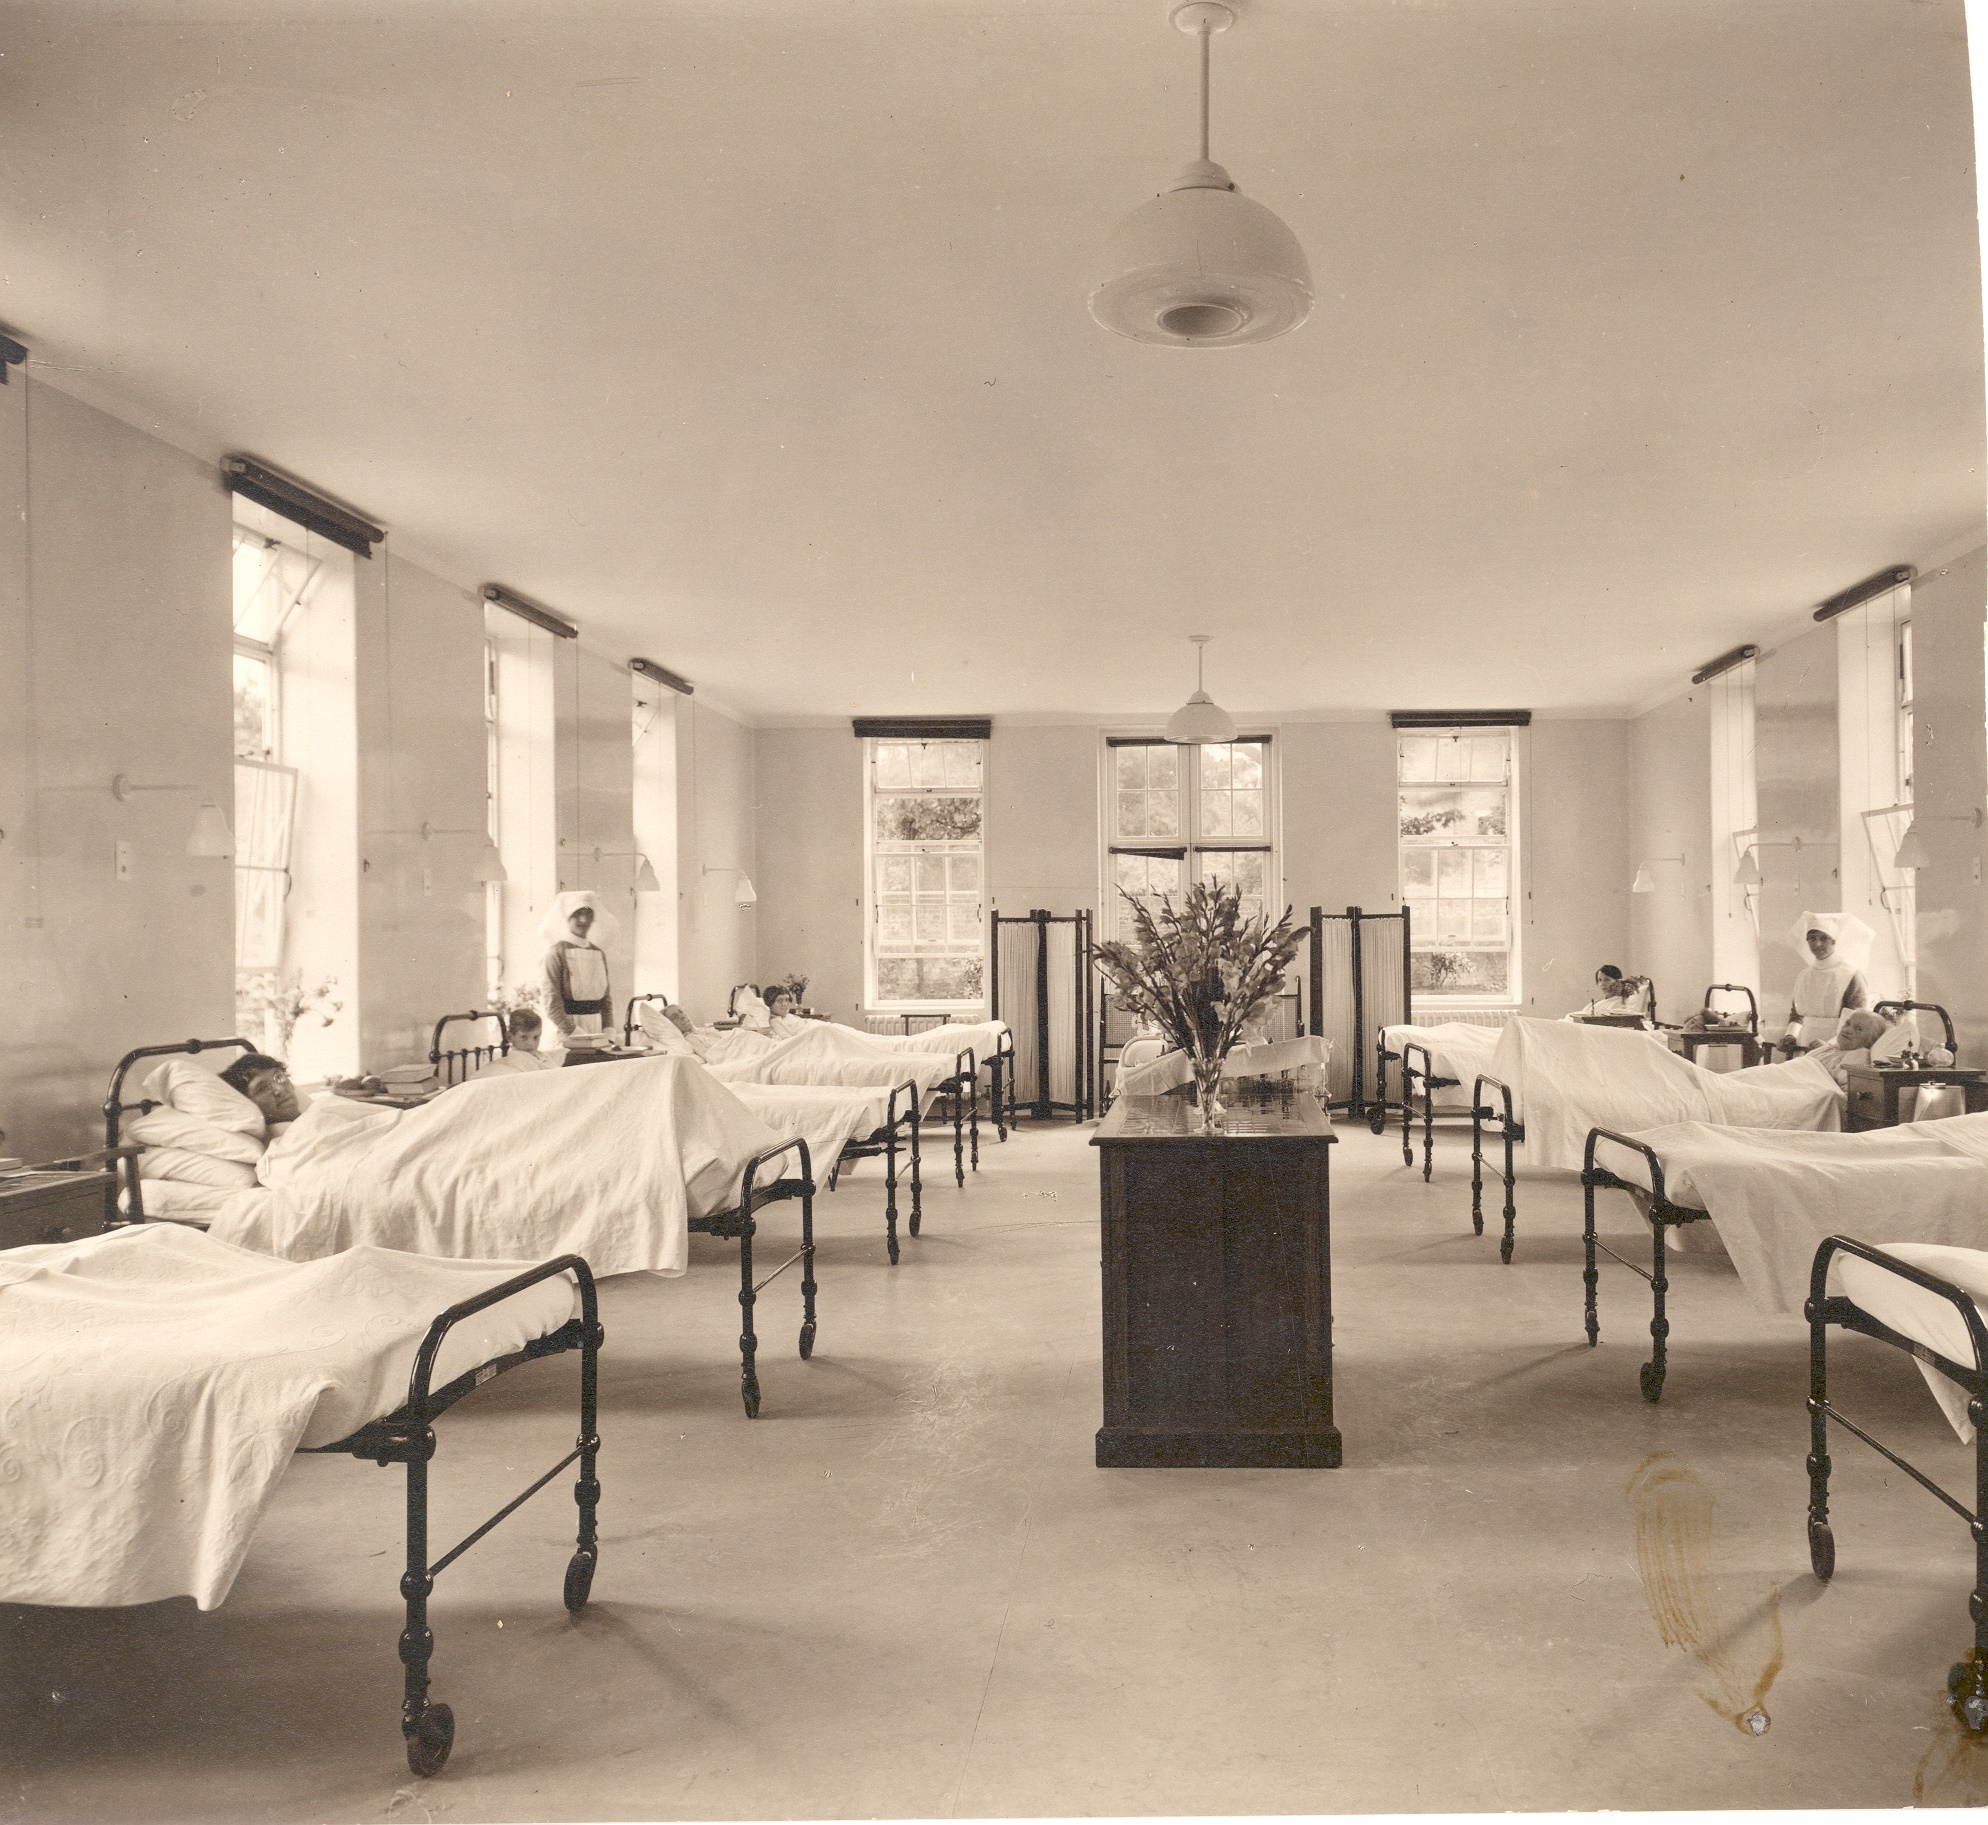 A ward inside the main Weybridge Cottage Hospital, Church Street, showing patients in beds and nurses in uniform. Undated but post-1928.